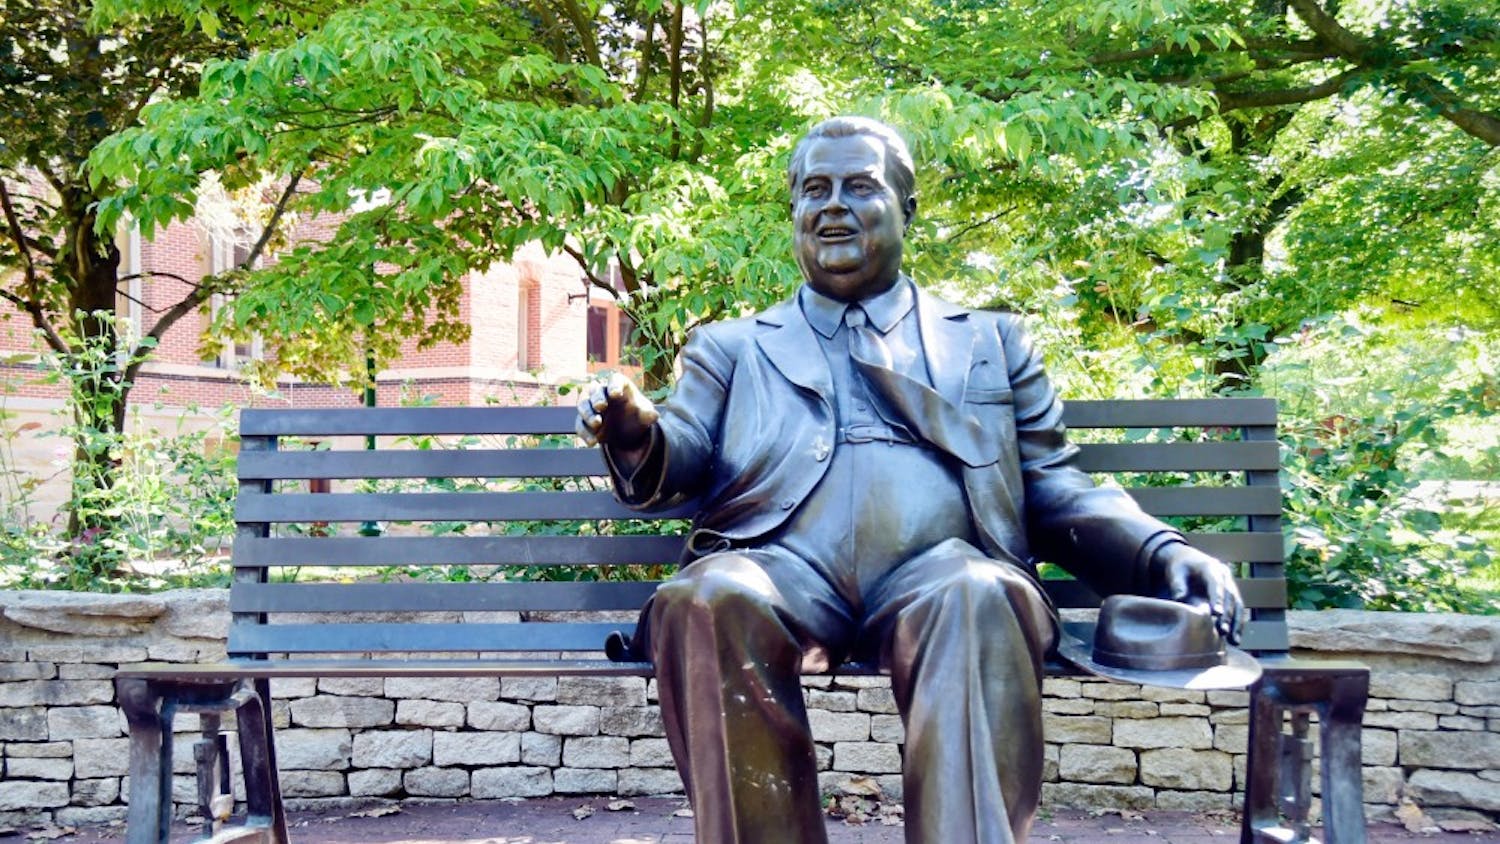 On Oct. 21, 2009, a sculpture of Herman B Wells was installed in the Old Crescent area of campus. It was crafted by artist Tuck Langland.